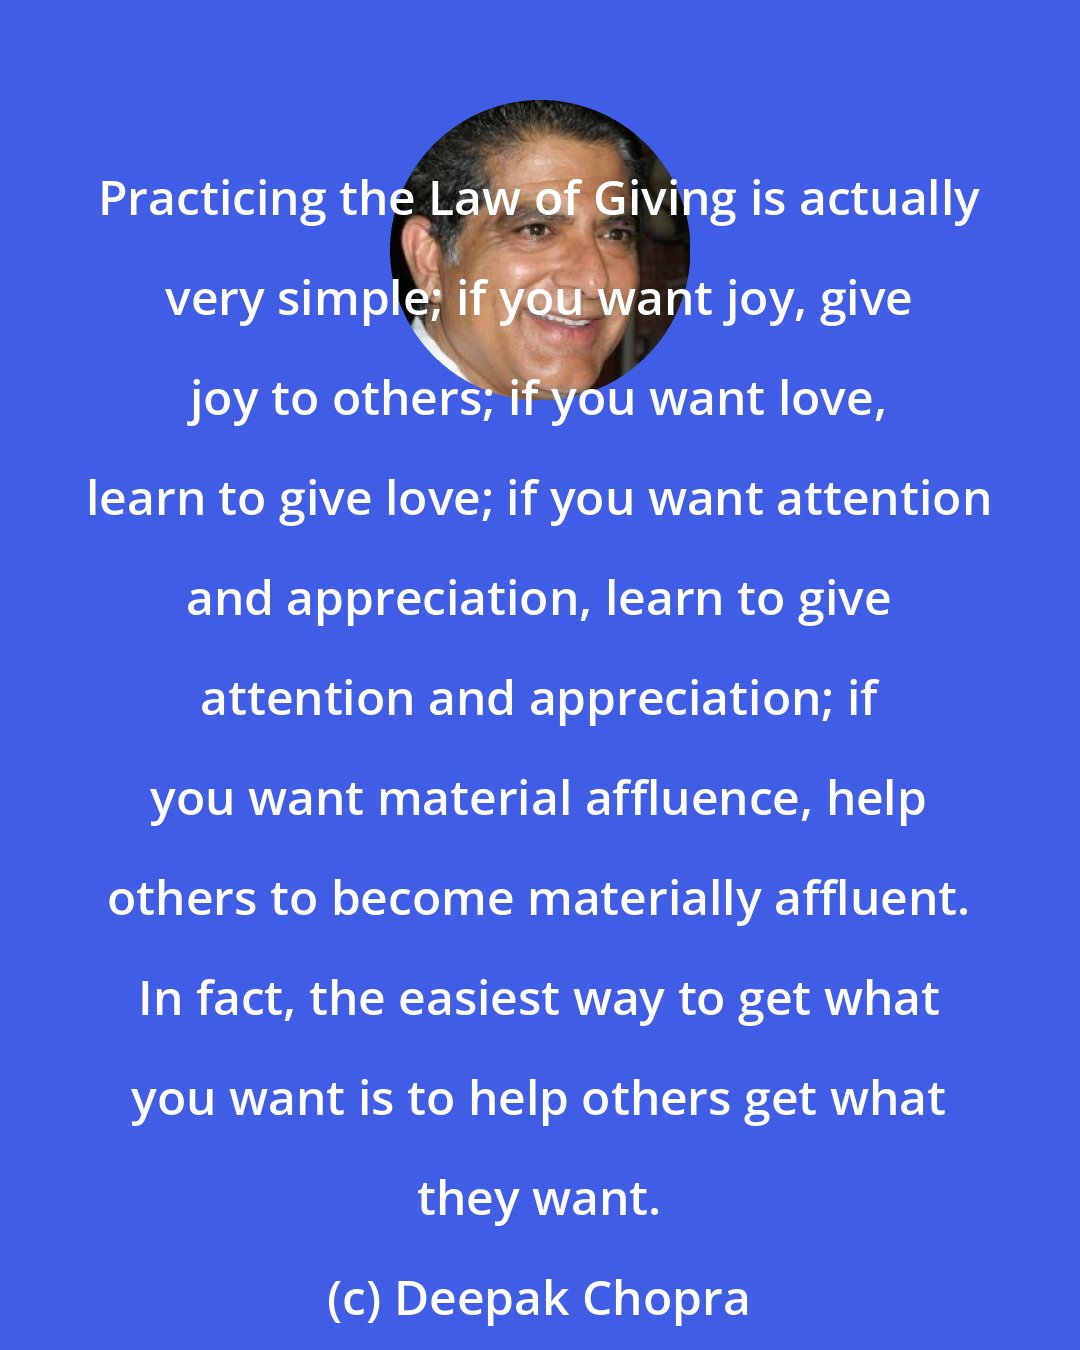 Deepak Chopra: Practicing the Law of Giving is actually very simple; if you want joy, give joy to others; if you want love, learn to give love; if you want attention and appreciation, learn to give attention and appreciation; if you want material affluence, help others to become materially affluent. In fact, the easiest way to get what you want is to help others get what they want.